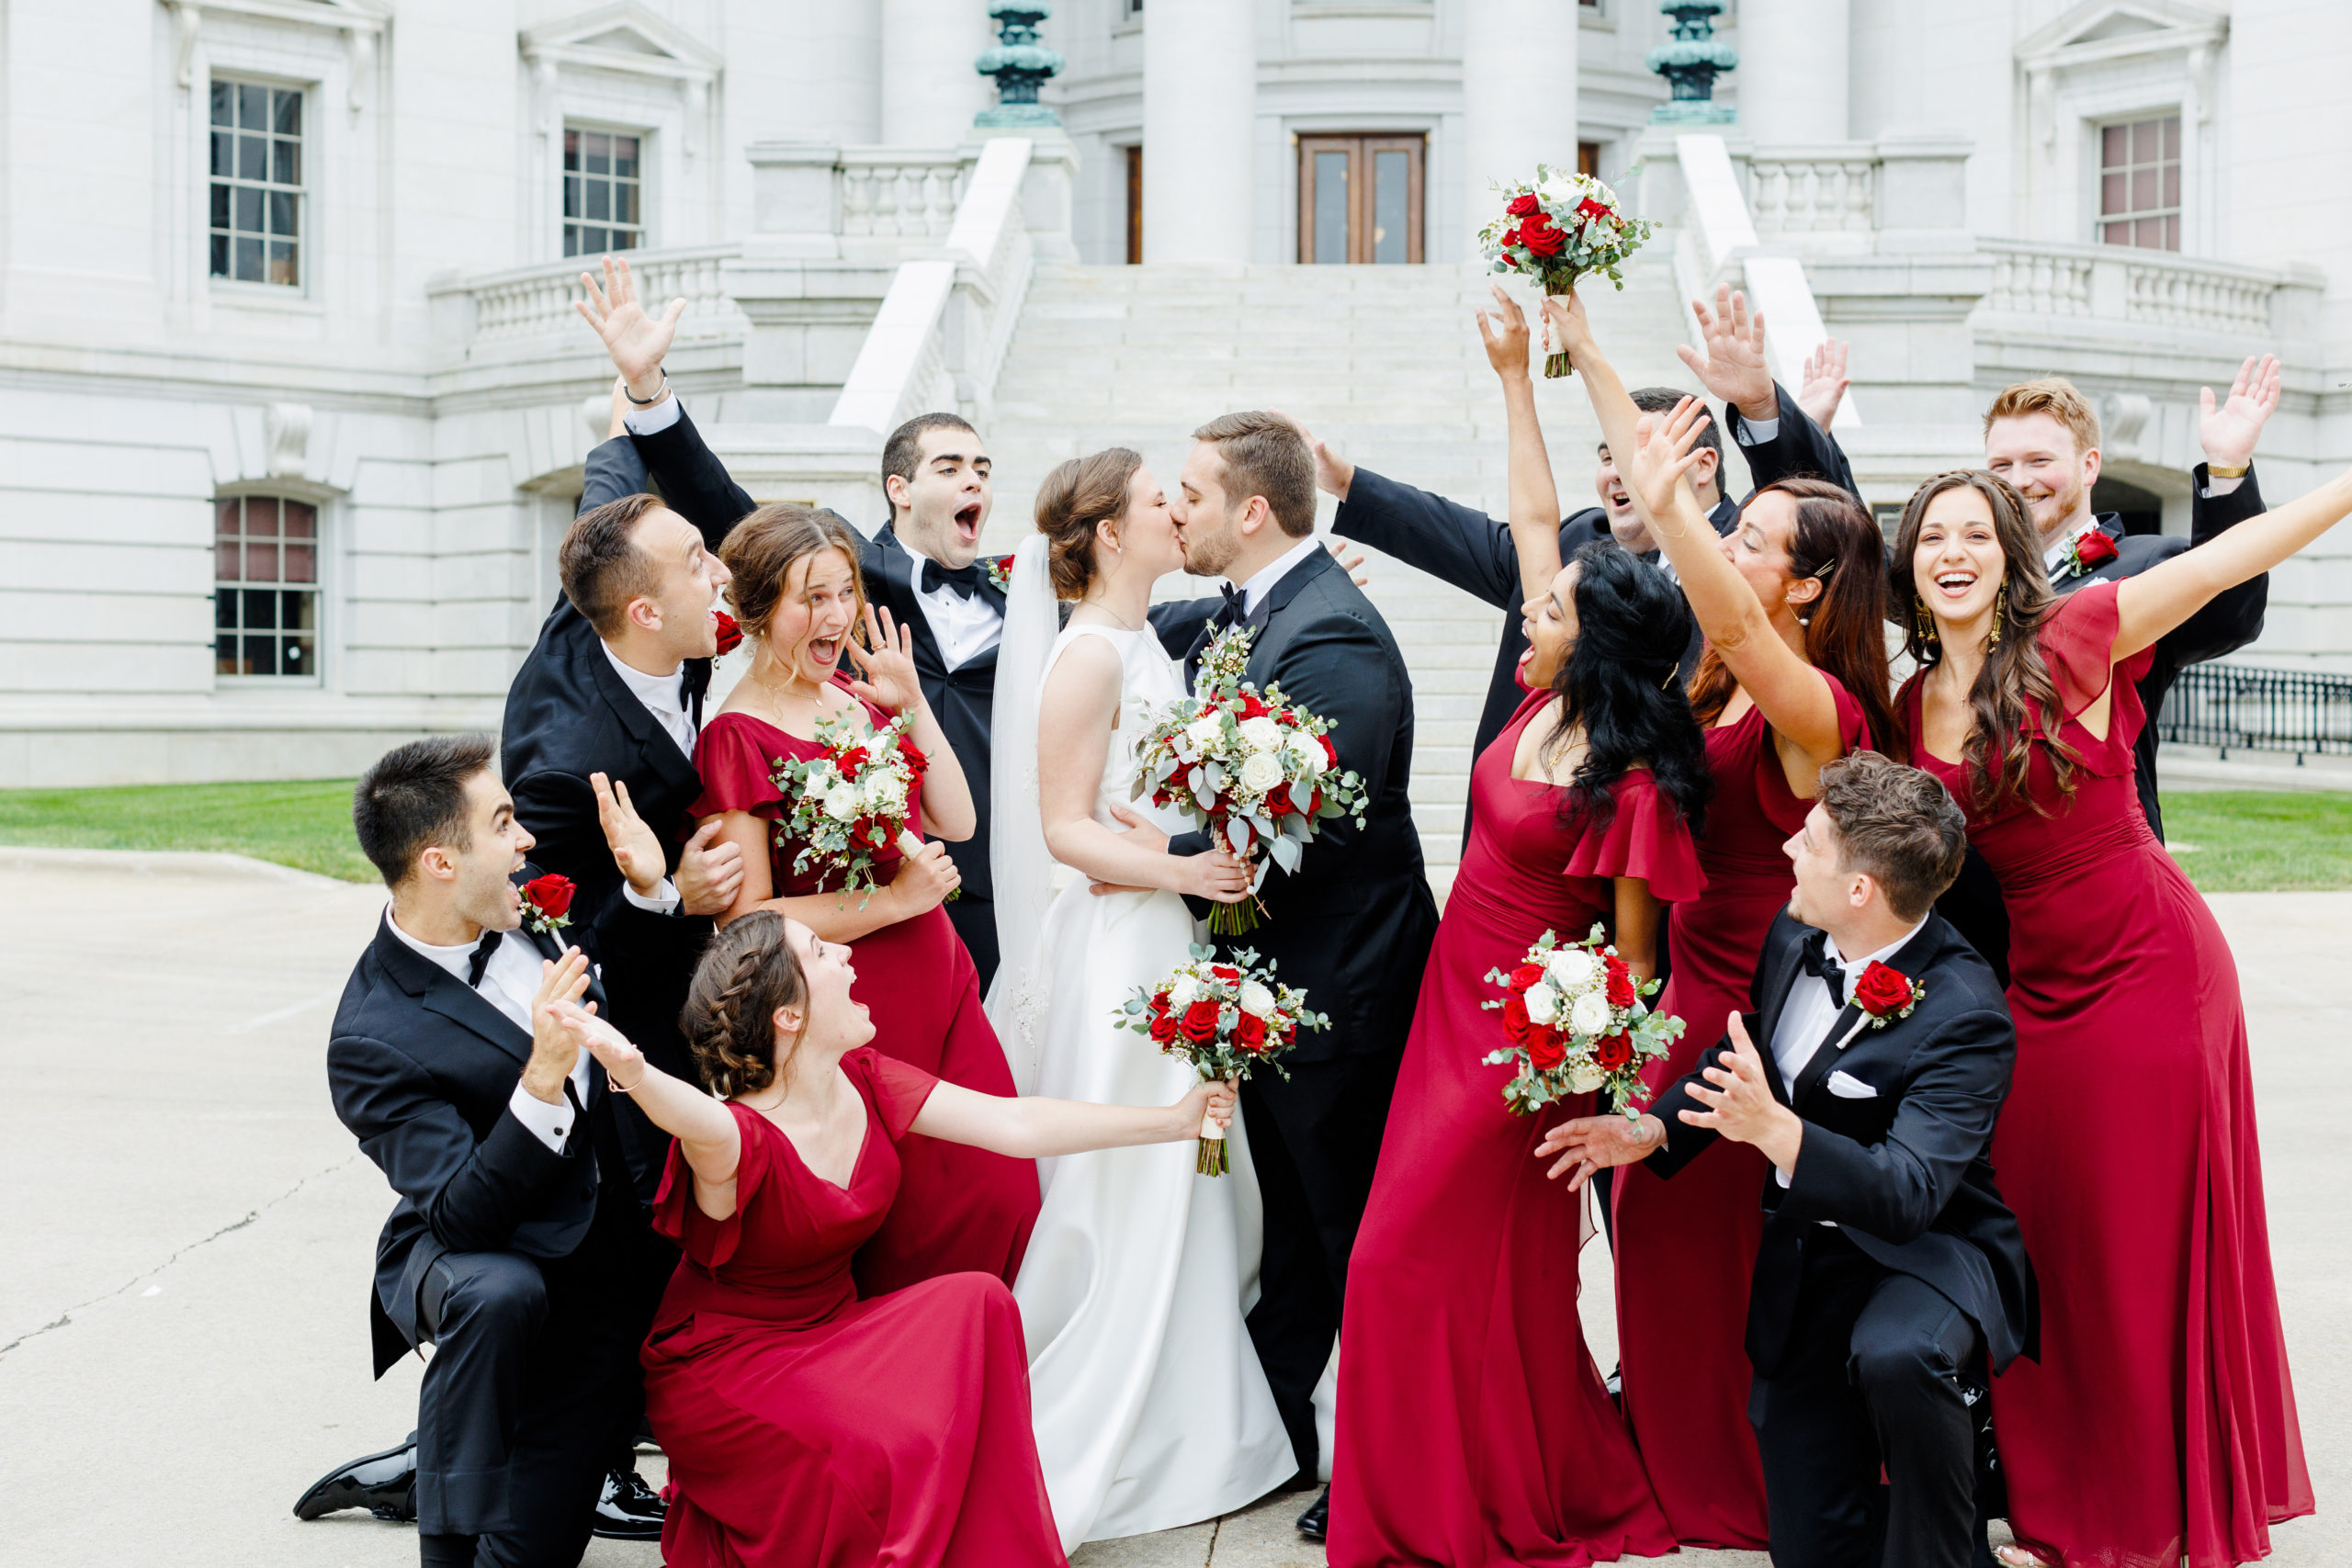 Wedding party cheering while bride and groom kiss in front of the Madison, Wisconsin state capitol